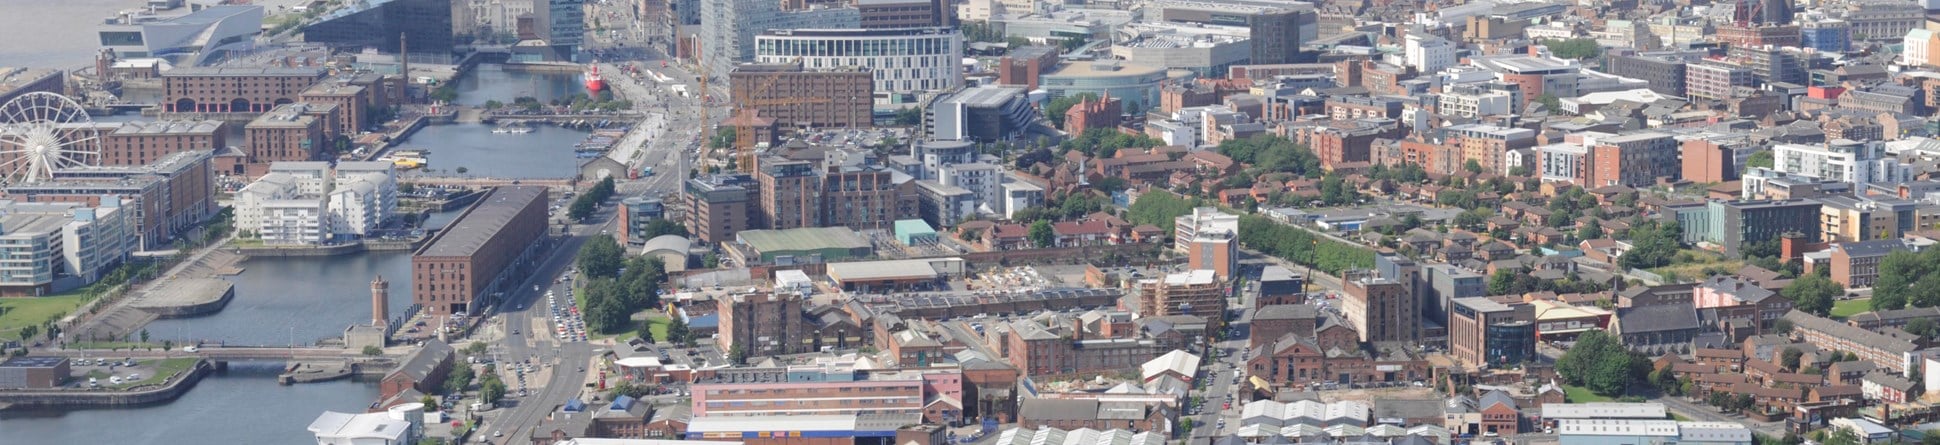 Aerial view of the Baltic Triangle